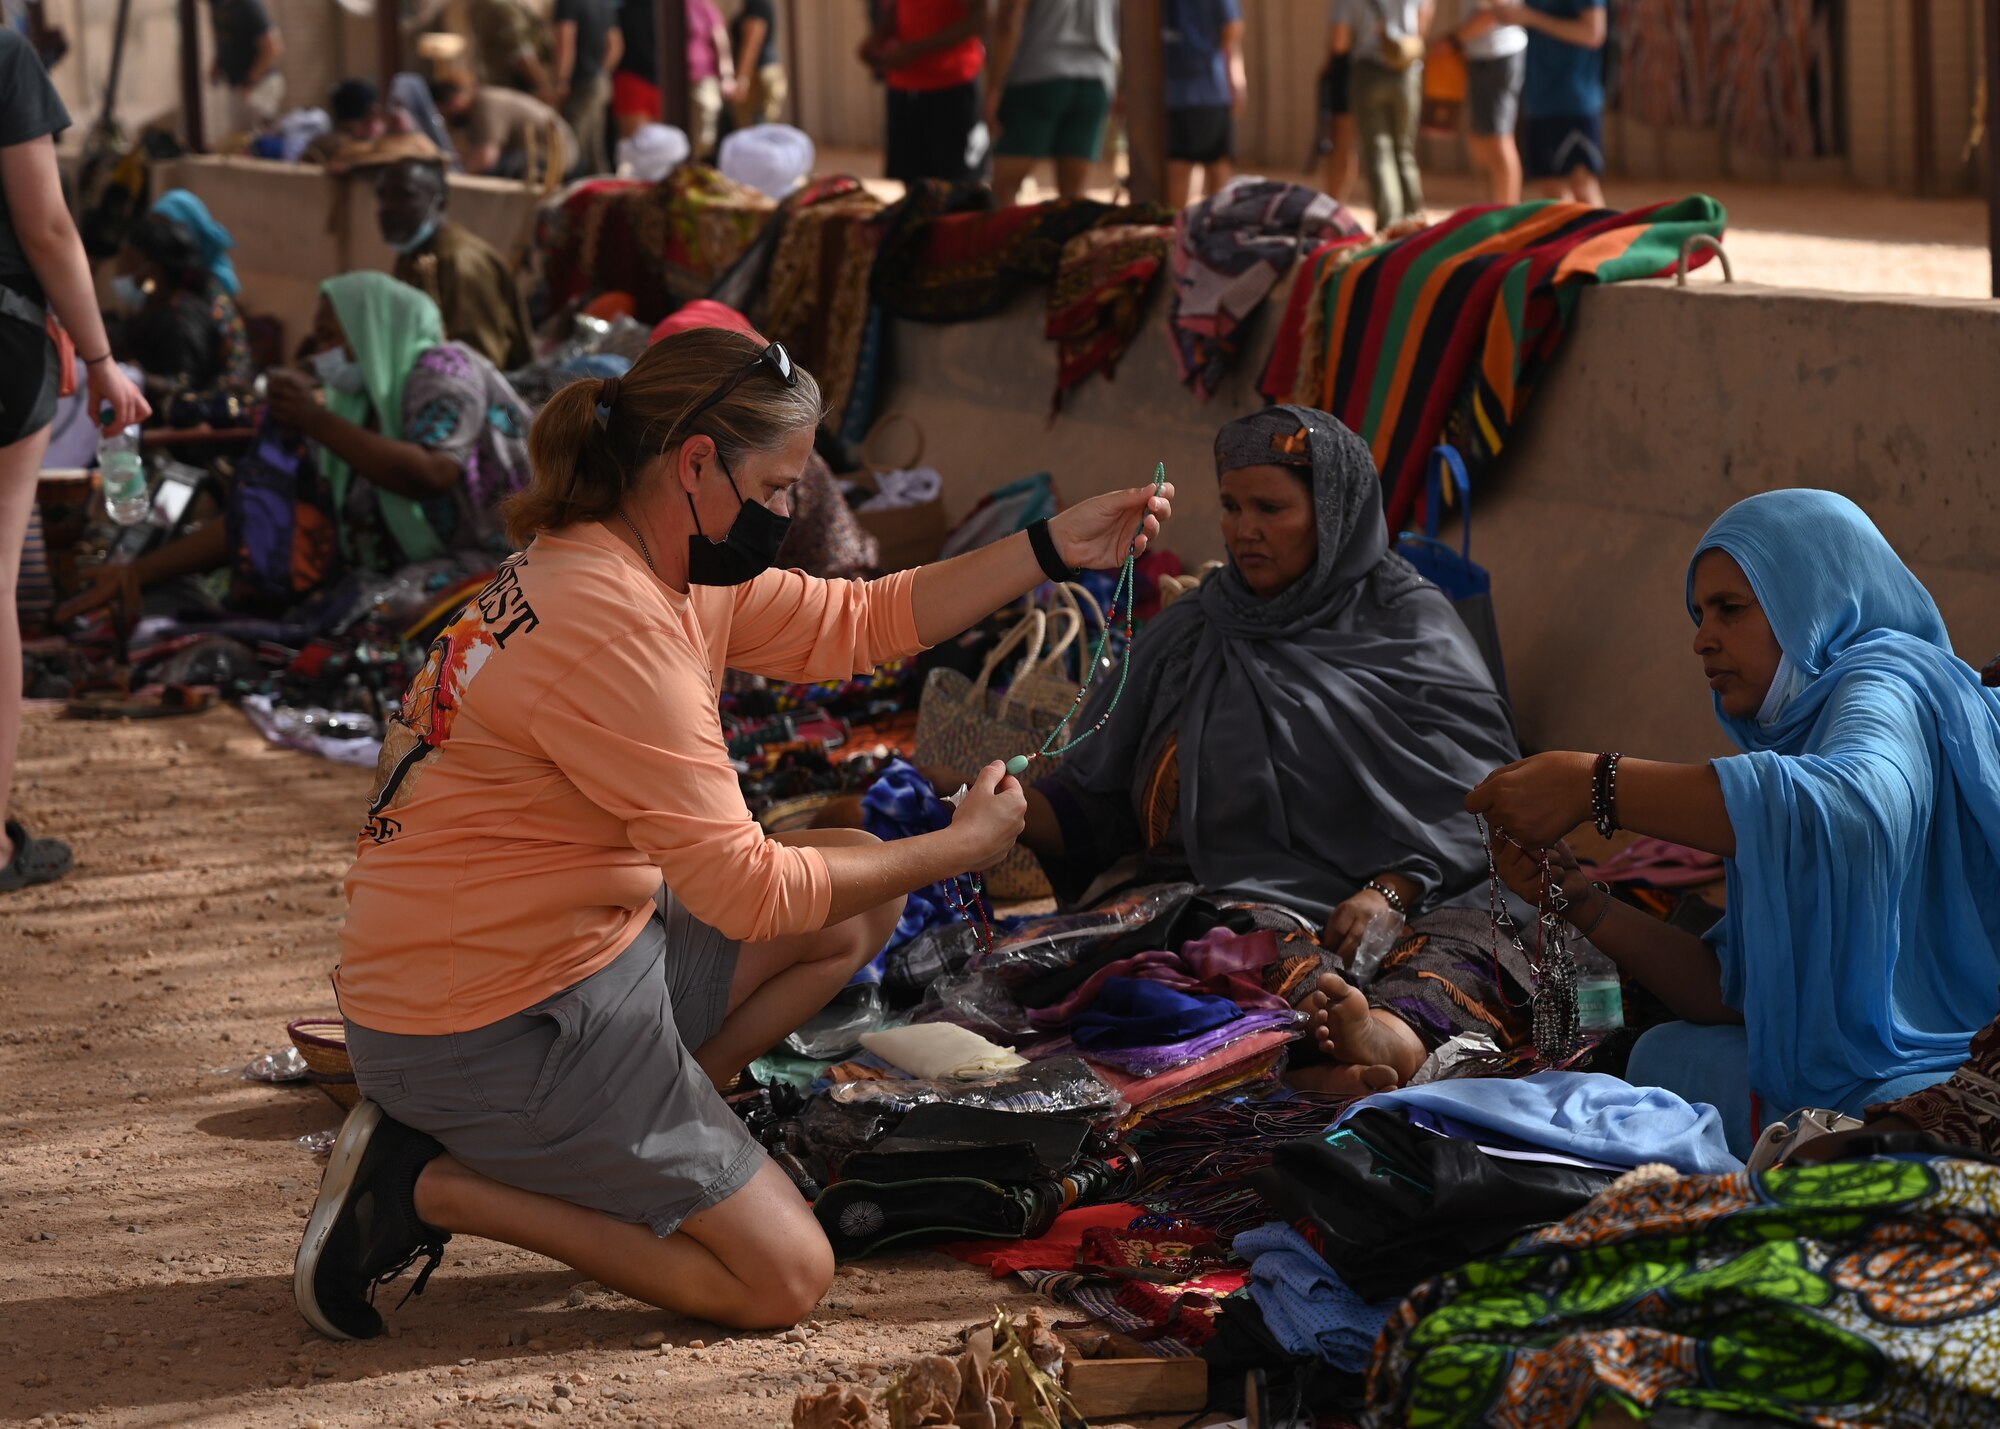 A U.S. service member assigned to Nigerien Air Base 201 browses through a vendor’s inventory during a bazaar at the base in Agadez, Niger, June 20, 2021. Members of Air Base 201 successfully injected more than 4.2 million West African CFA Franc which is approximately 14 thousand dollars into the local economy.(U.S. Air Force photo by Airman 1st Class Jan K. Valle)